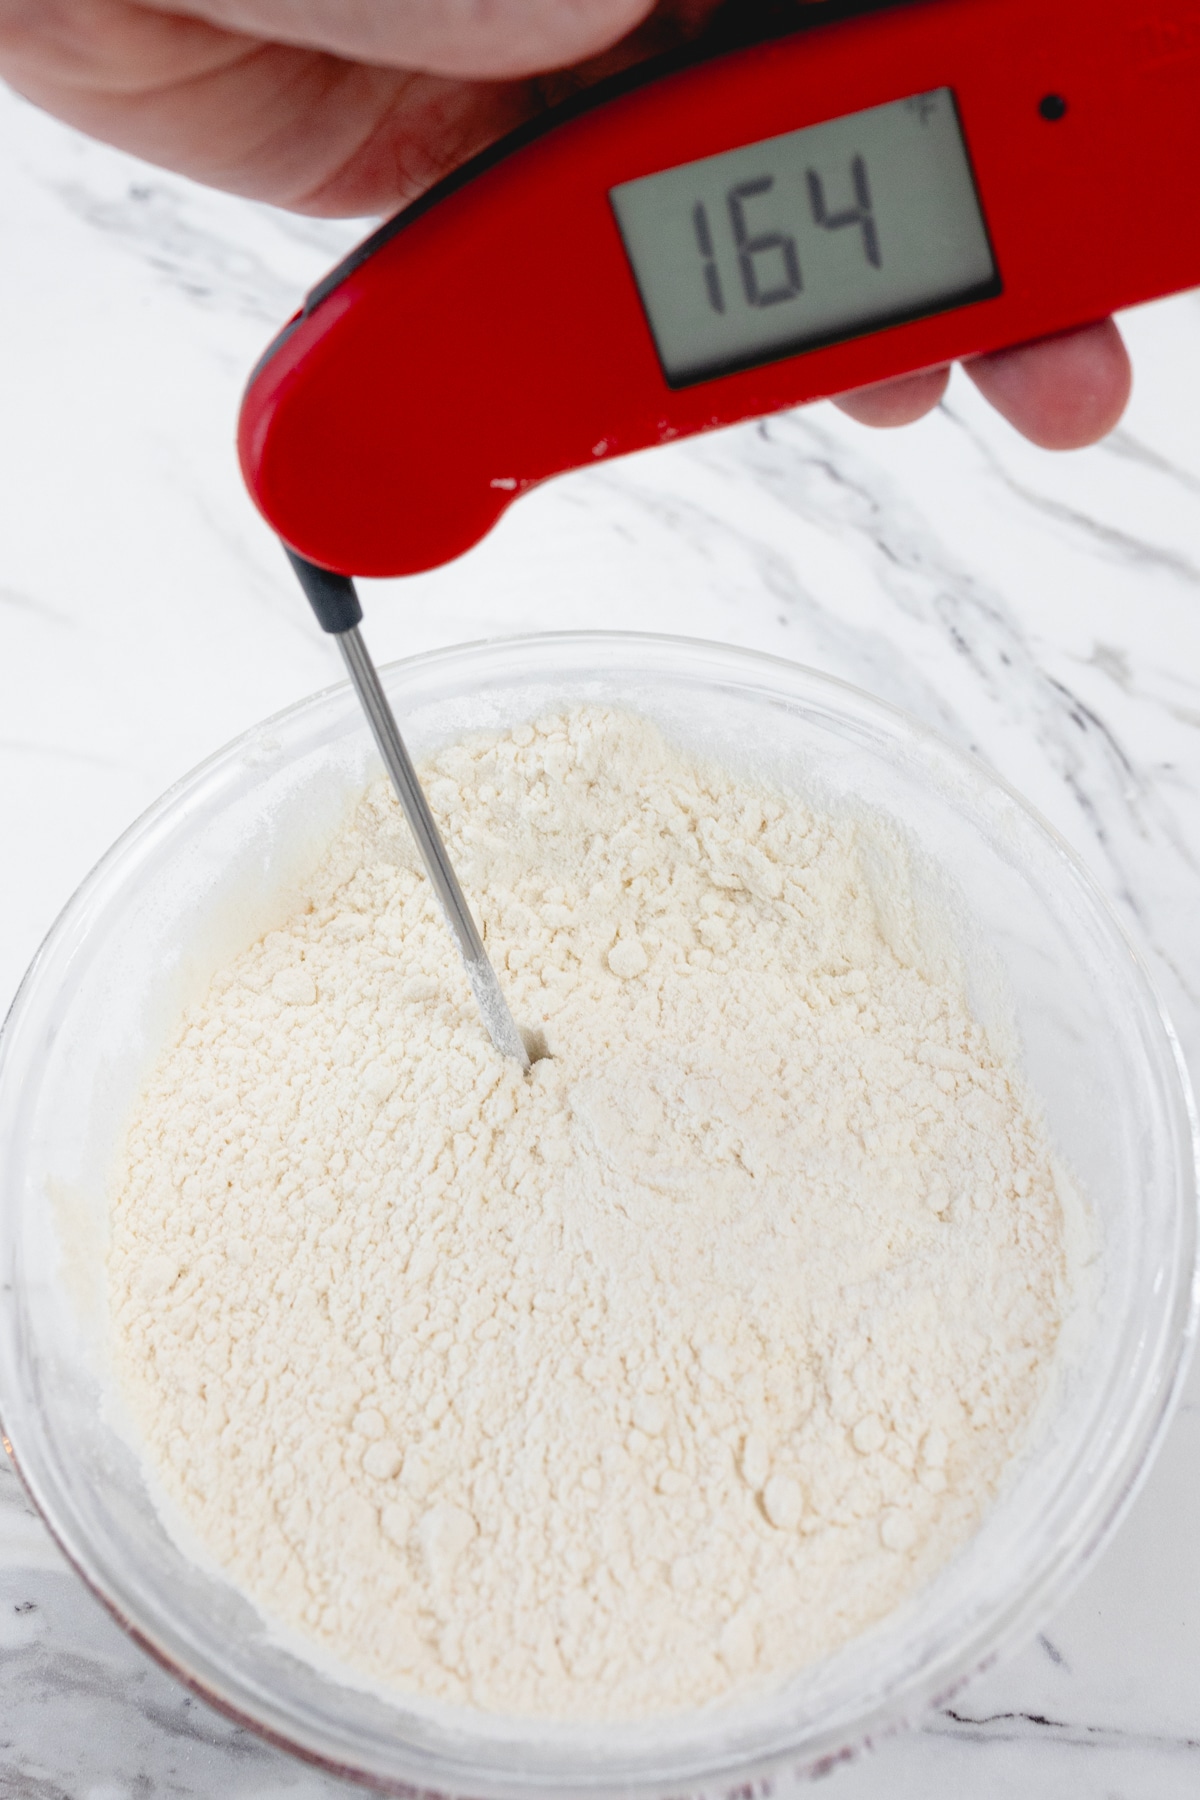 Close up view of flour in a microwavable bowl with a thermometer inserted below the surface.